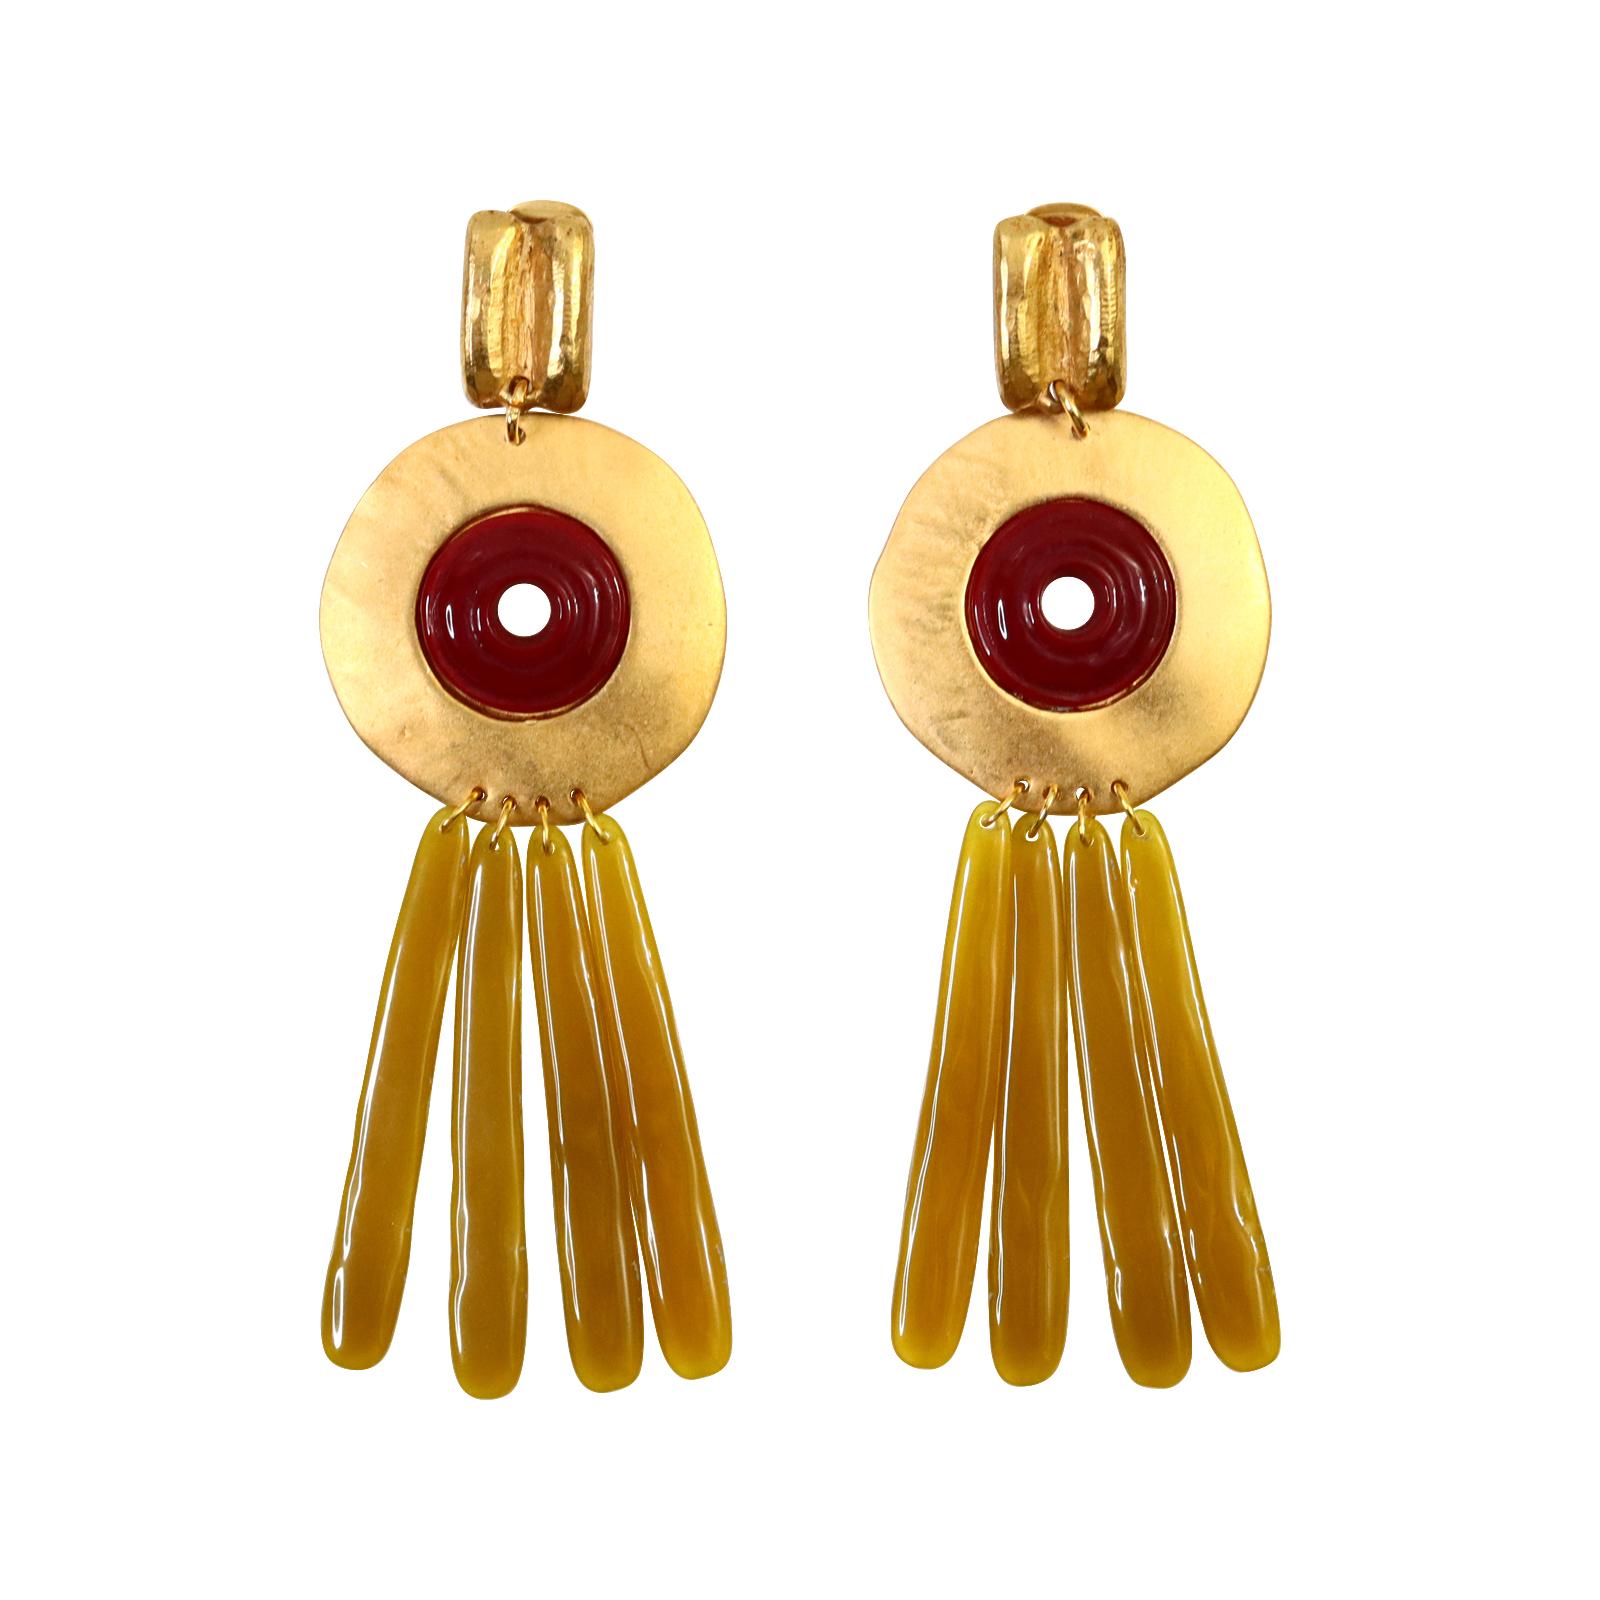 Modern Vintage Isaky Paris Gold Tone Dangling Earrings Circa 1980s For Sale